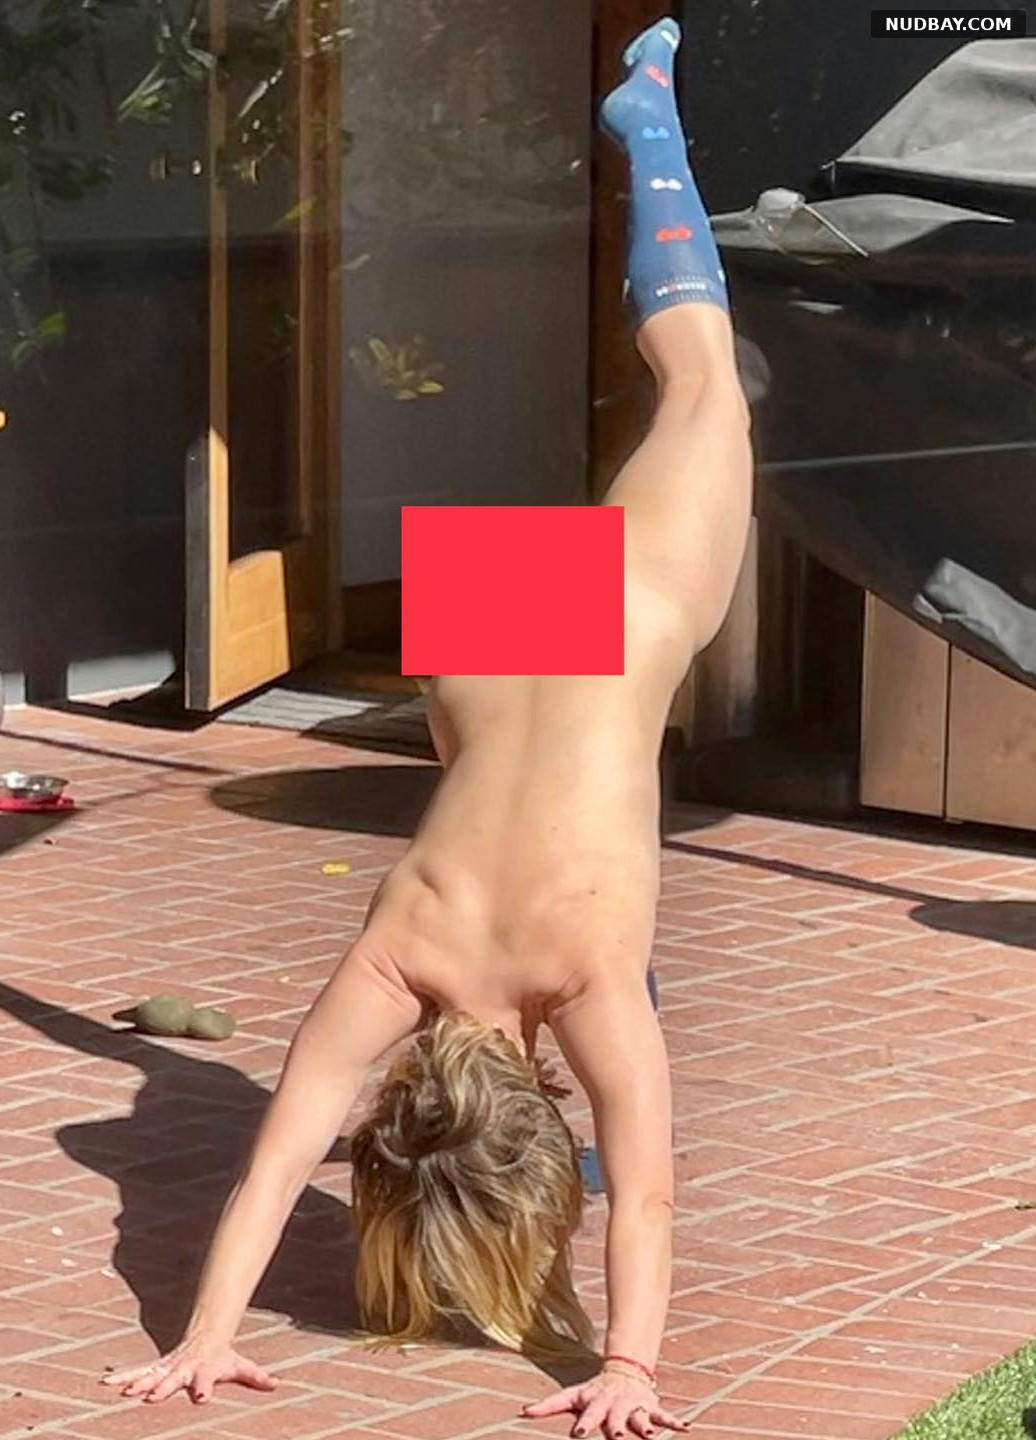 Kristen Bell attempting a nude headstand May 09 2021